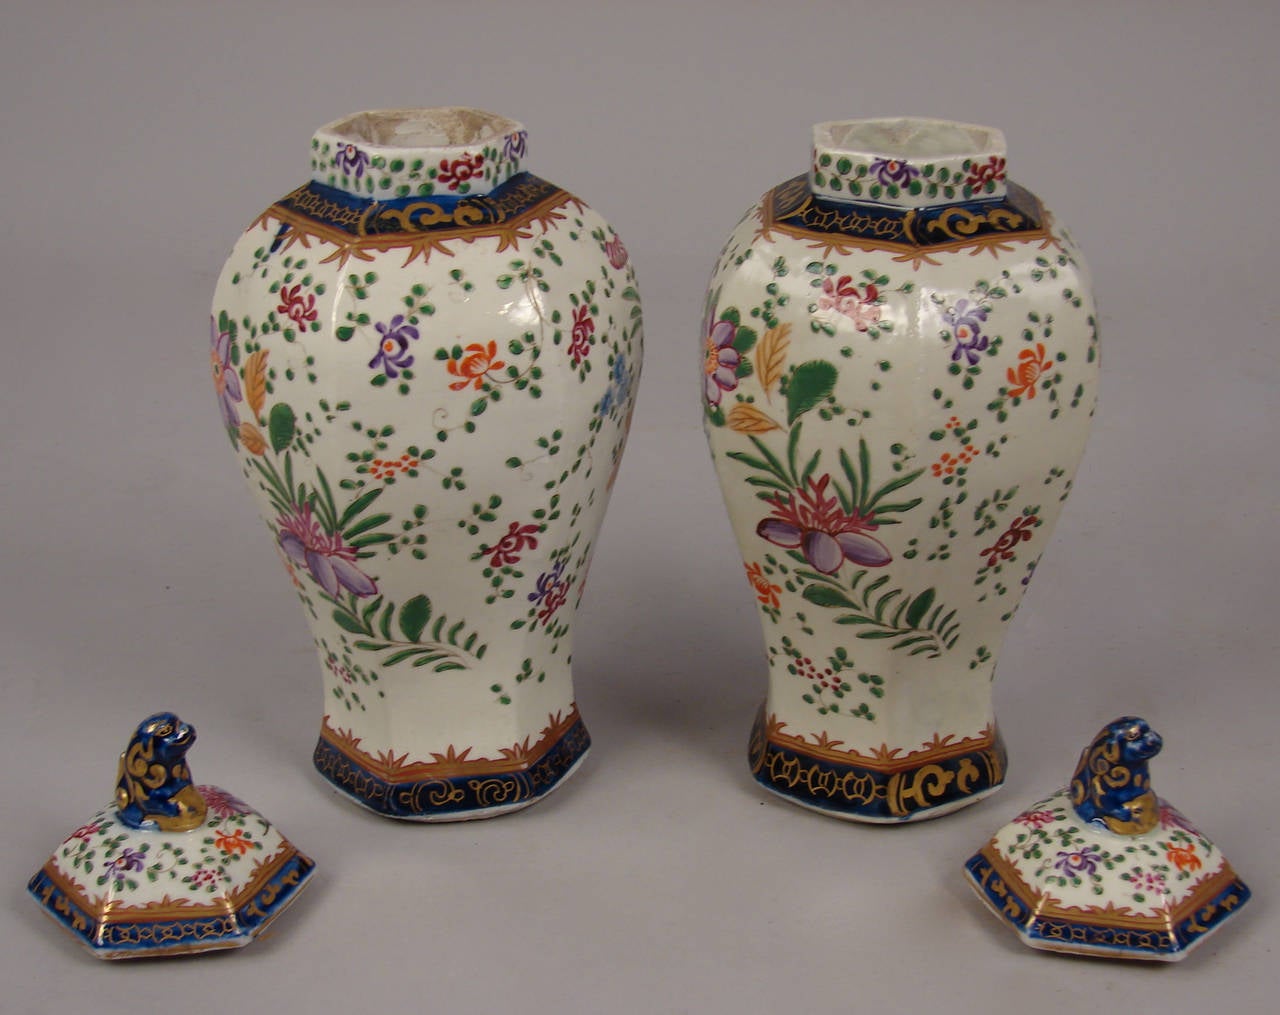 A pretty pair of French porcelain hexagonal form lidded vases decorated with lavender and rose peonies and floral sprigs, the blue and gold trimmed lids surmounted with a blue fu lion finial, circa 1900.